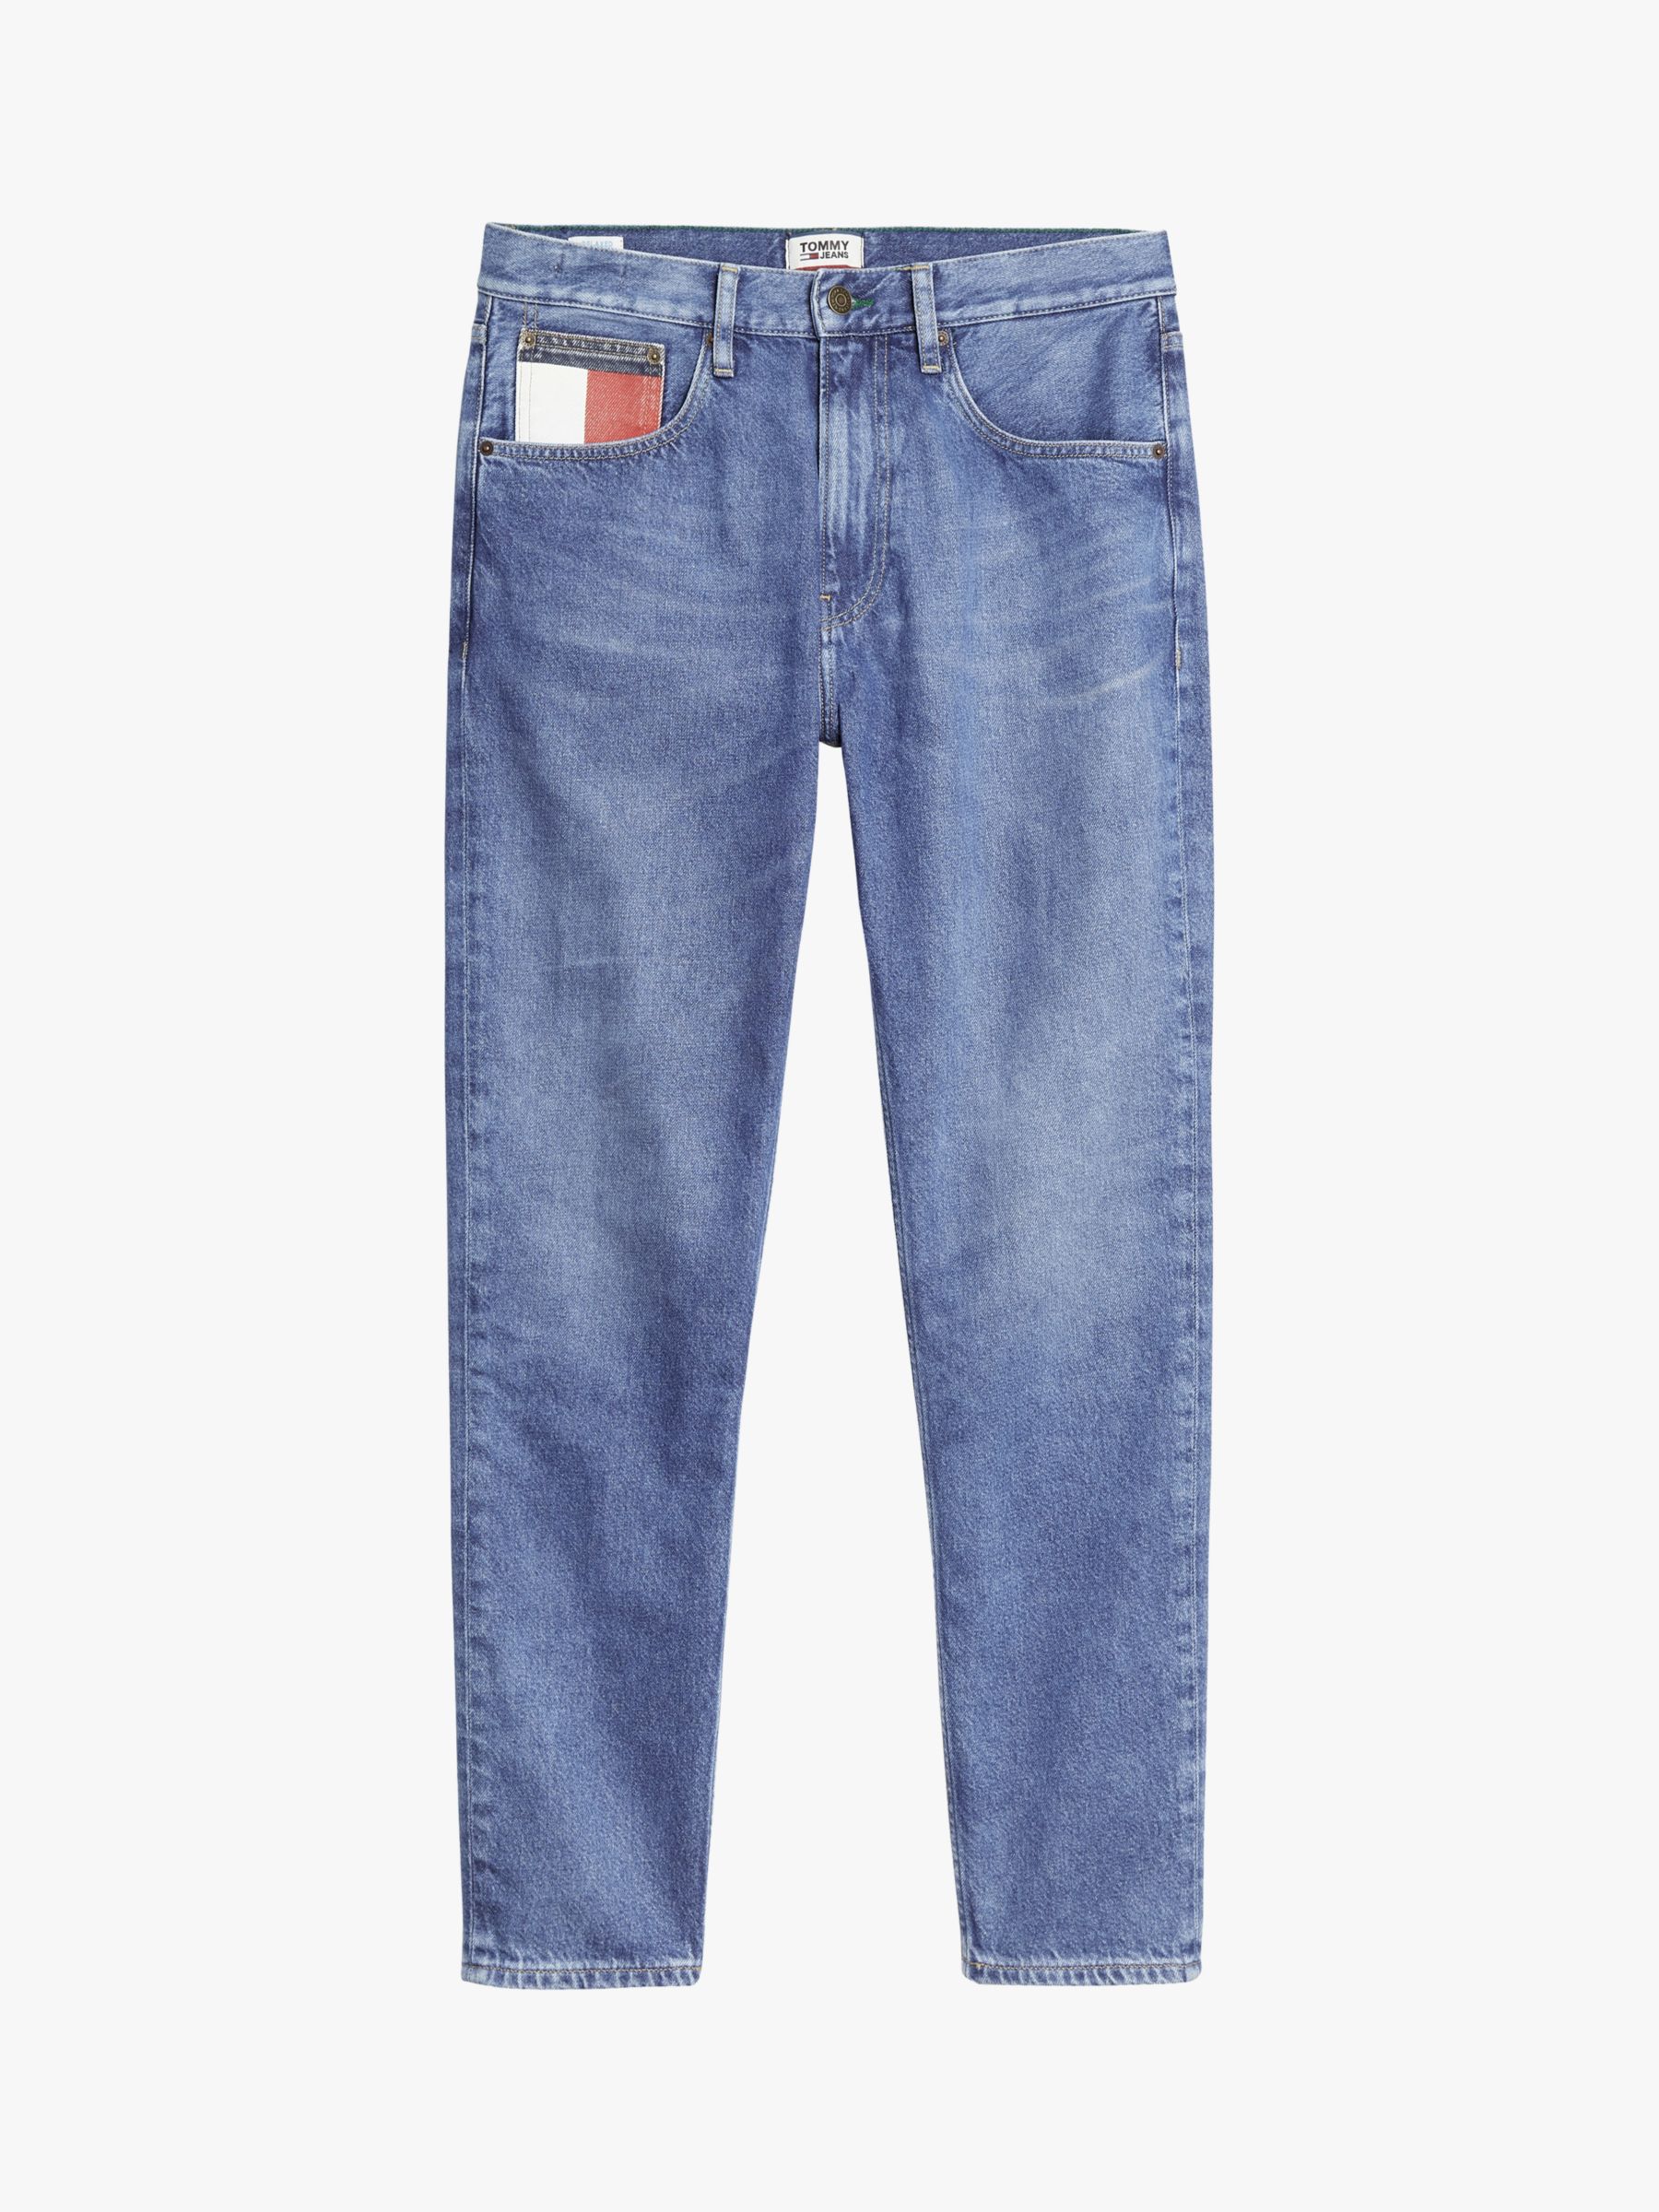 tapered jeans online